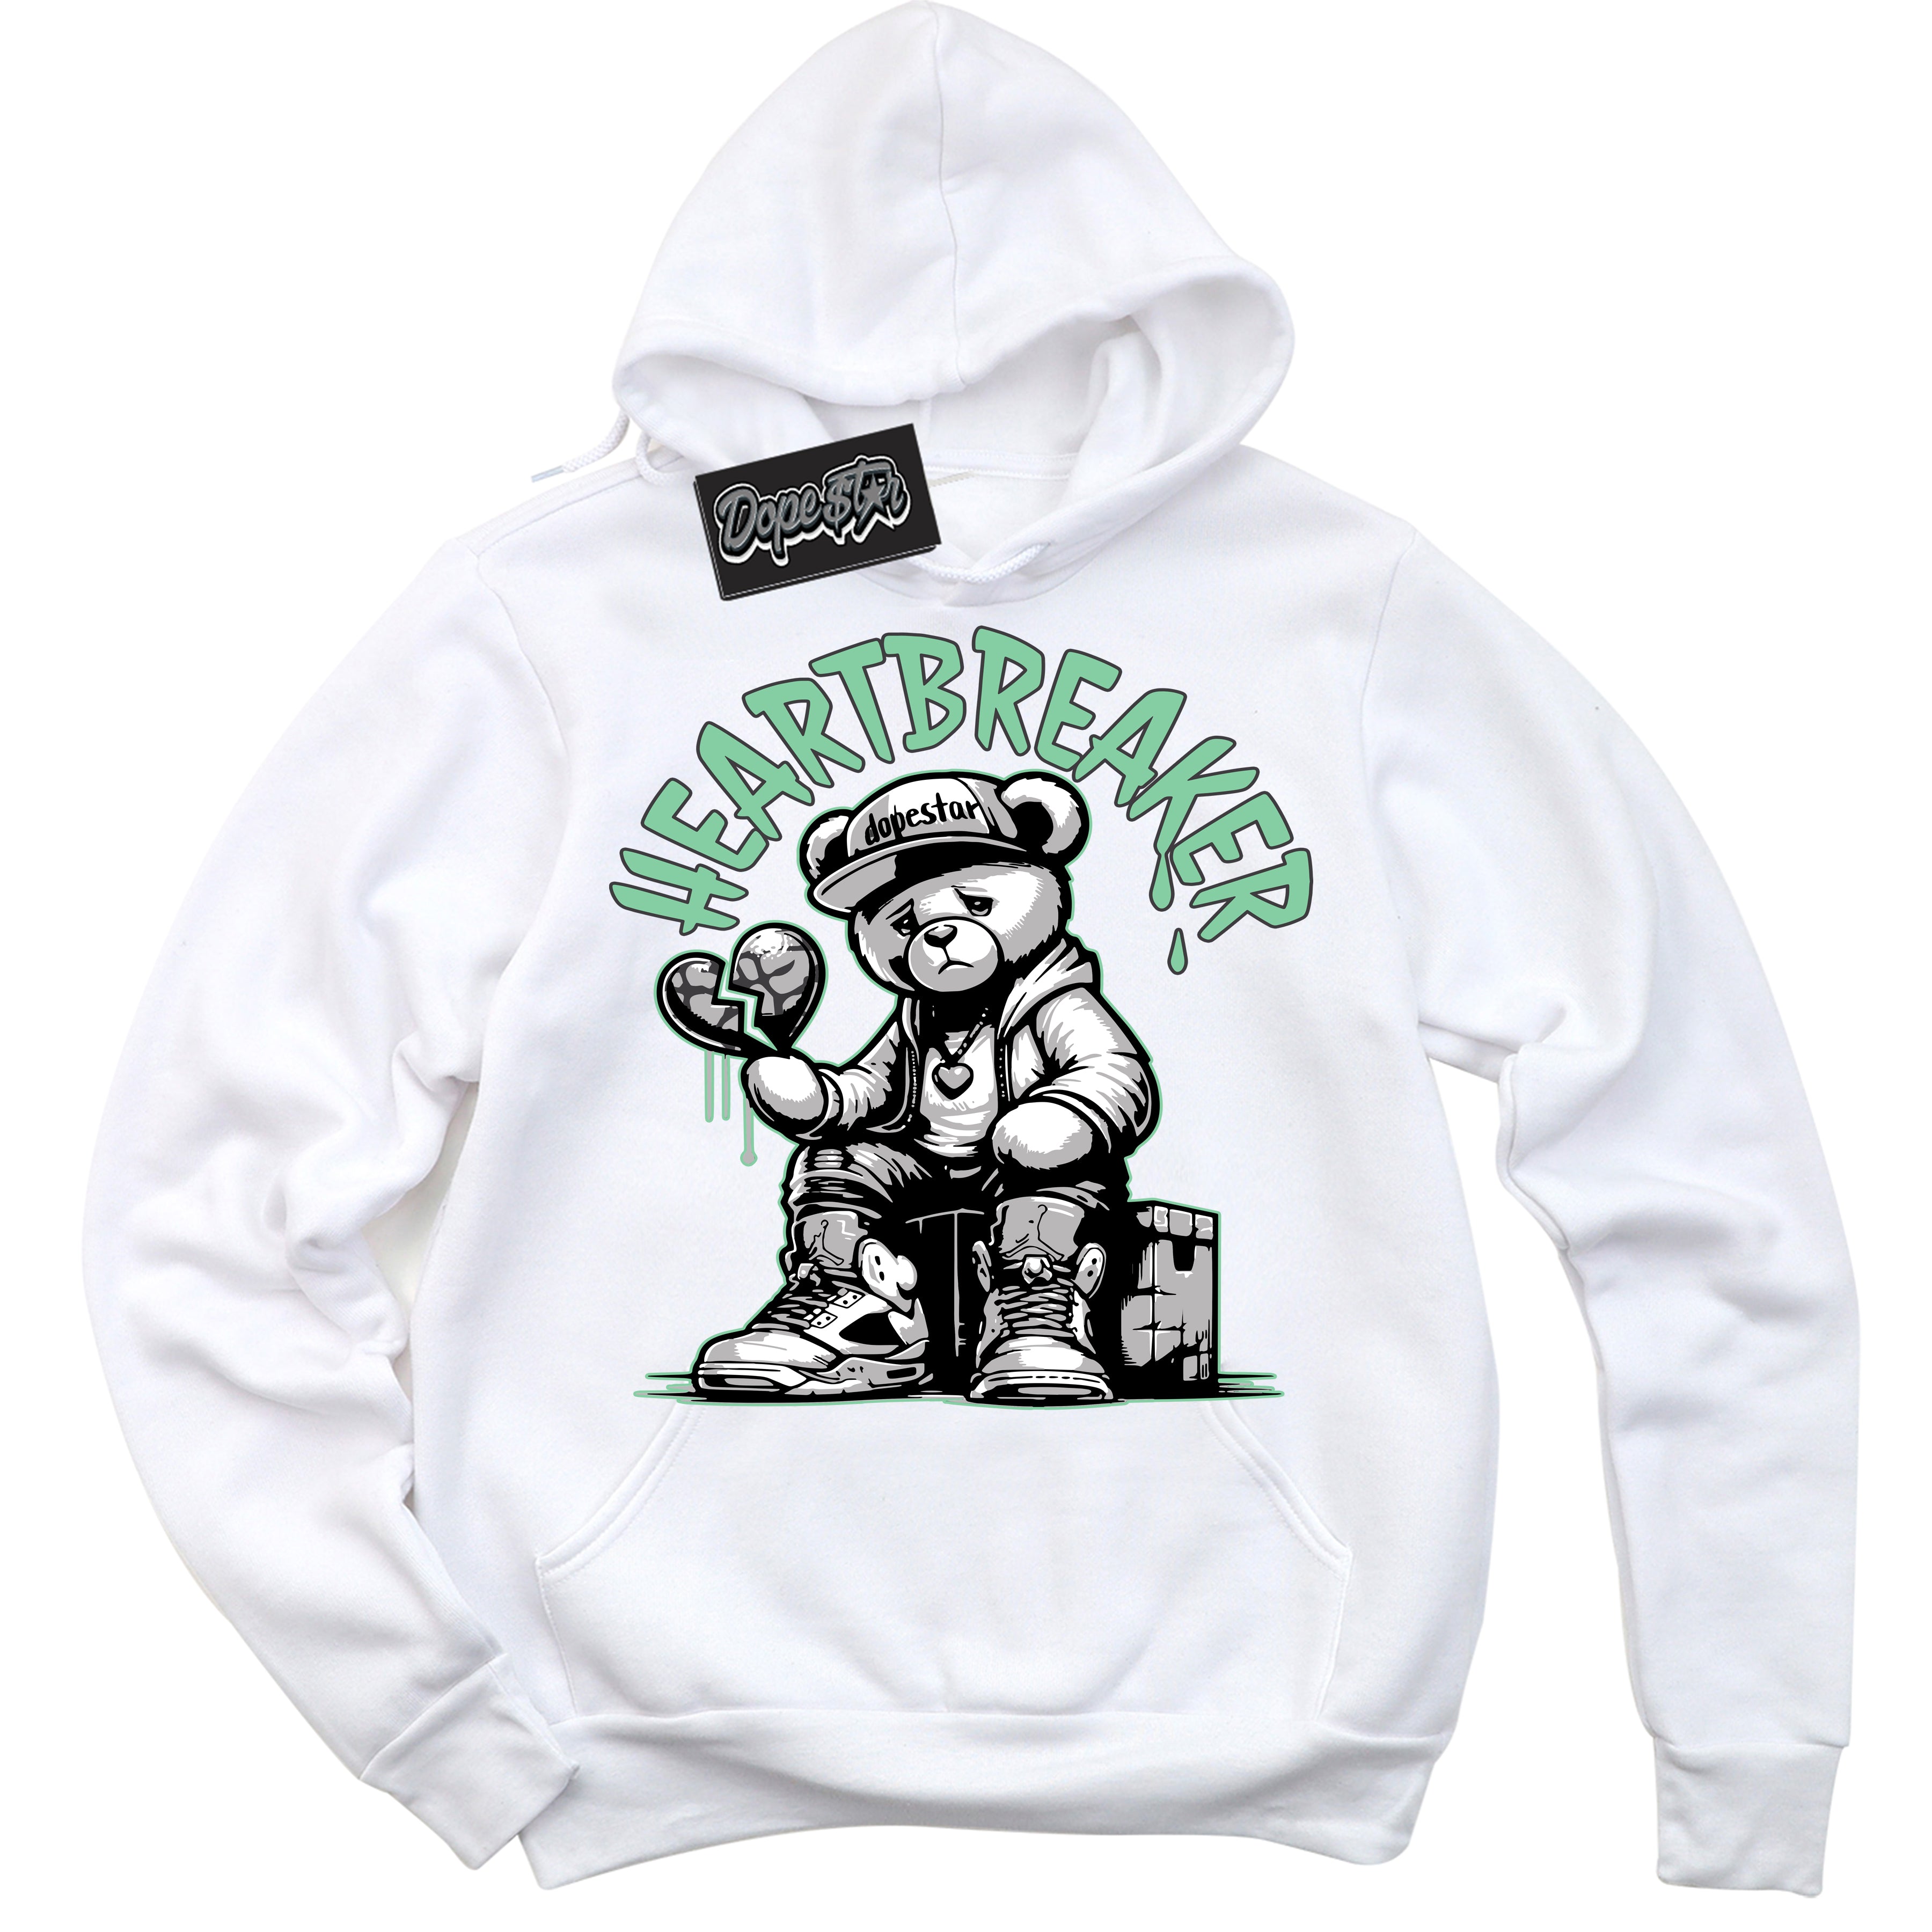 Cool White Graphic DopeStar Hoodie with “ Heartbreaker “ print, that perfectly matches Green Glow 3s sneakers